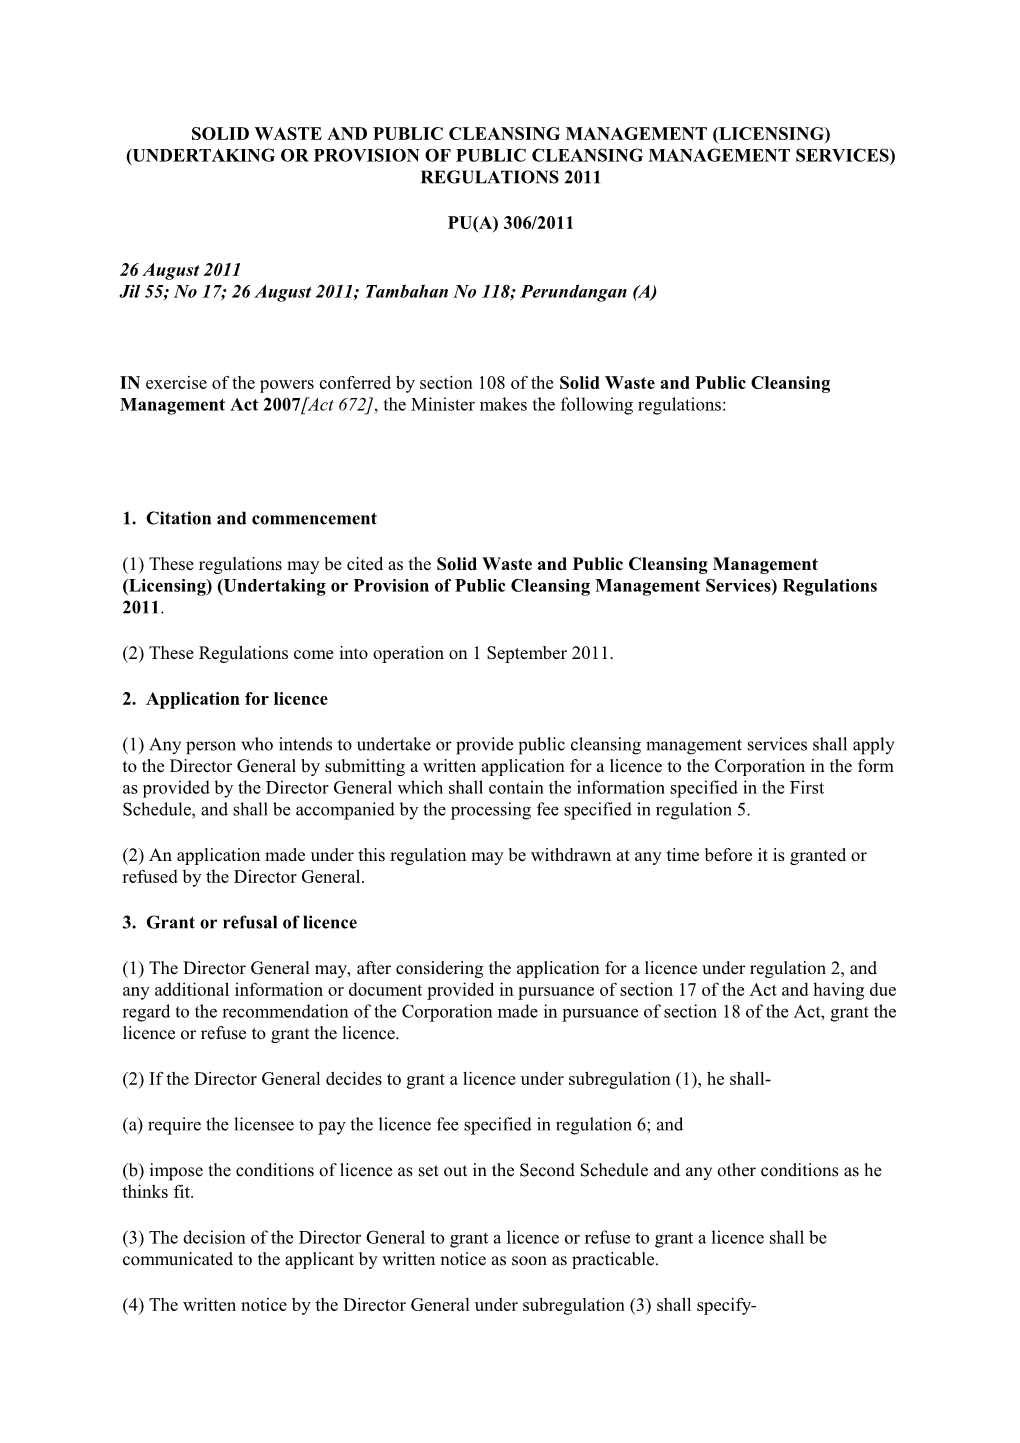 Solid Waste and Public Cleansing Management (Licensing) (Undertaking Or Provision of Public